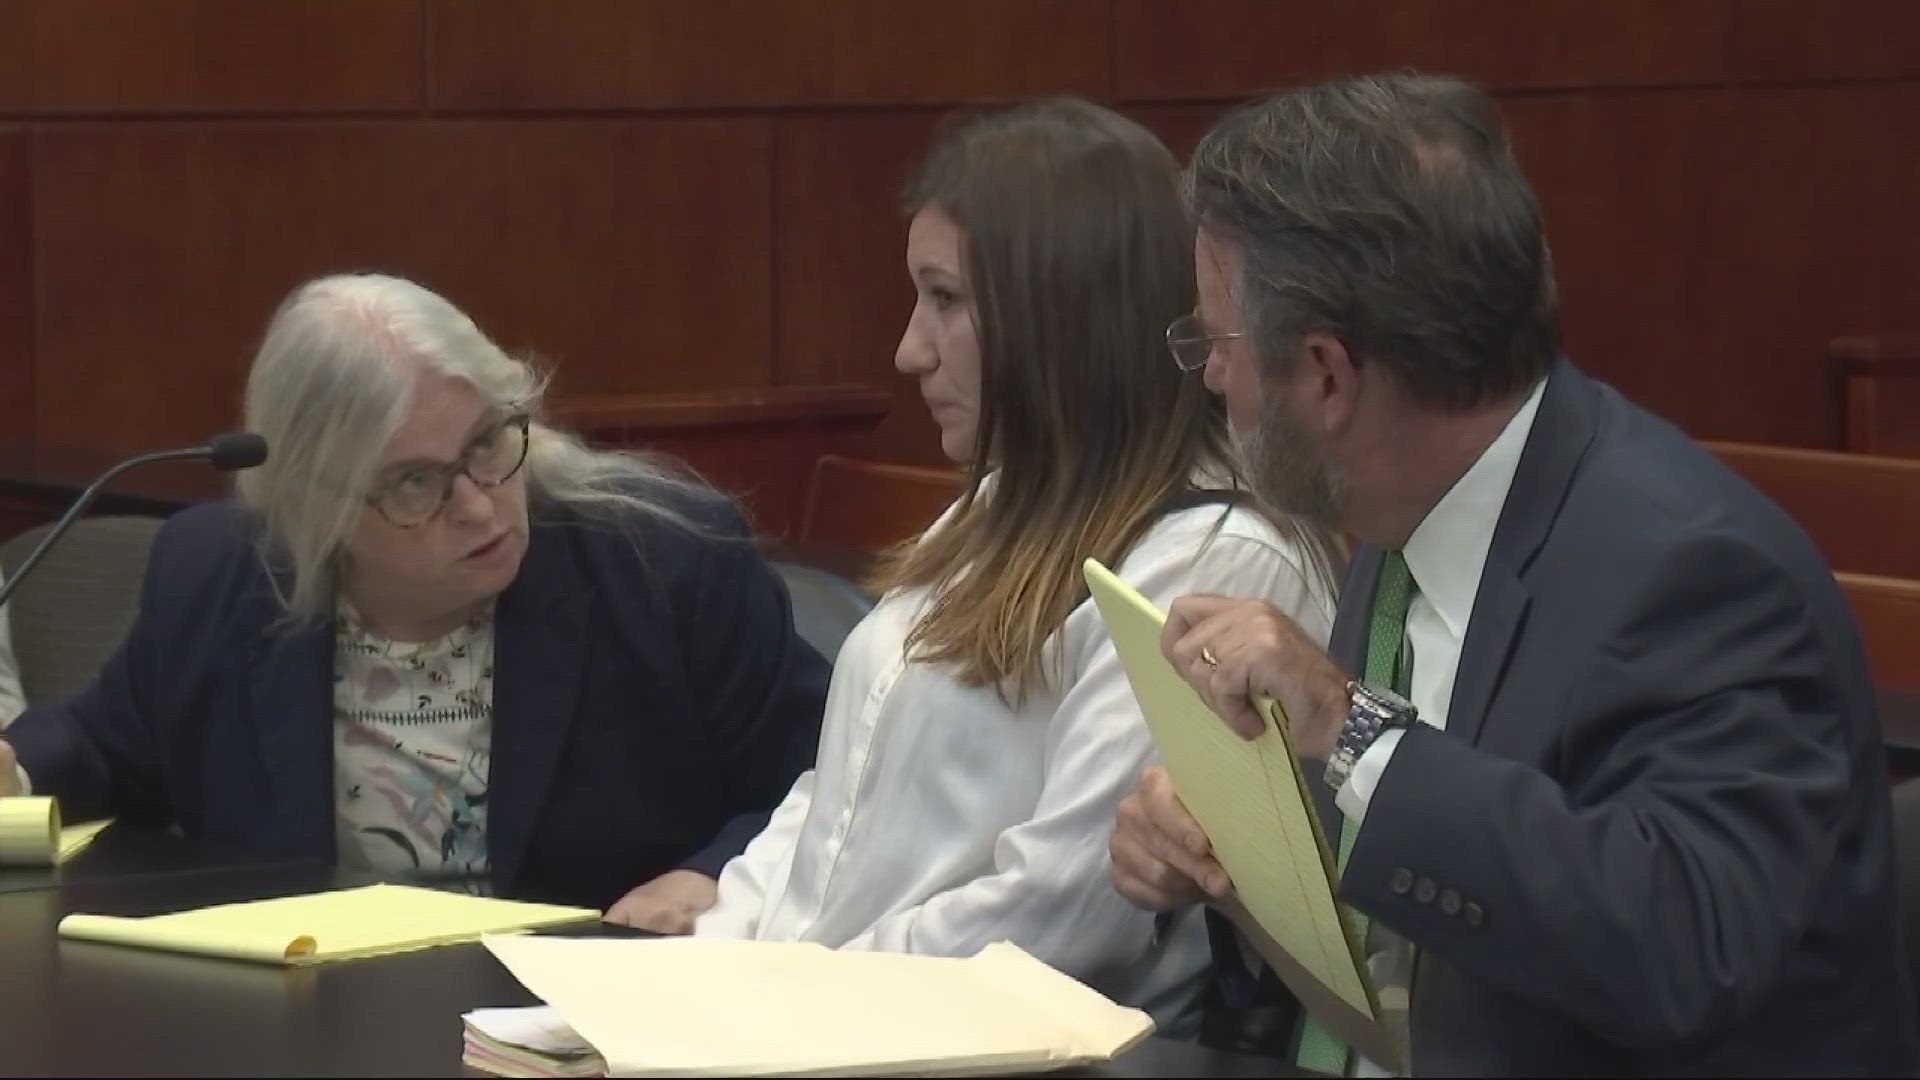 Crystal Smith pleaded guilty to interfering with the investigation after her son brutally murdered Tristyn Bailey.